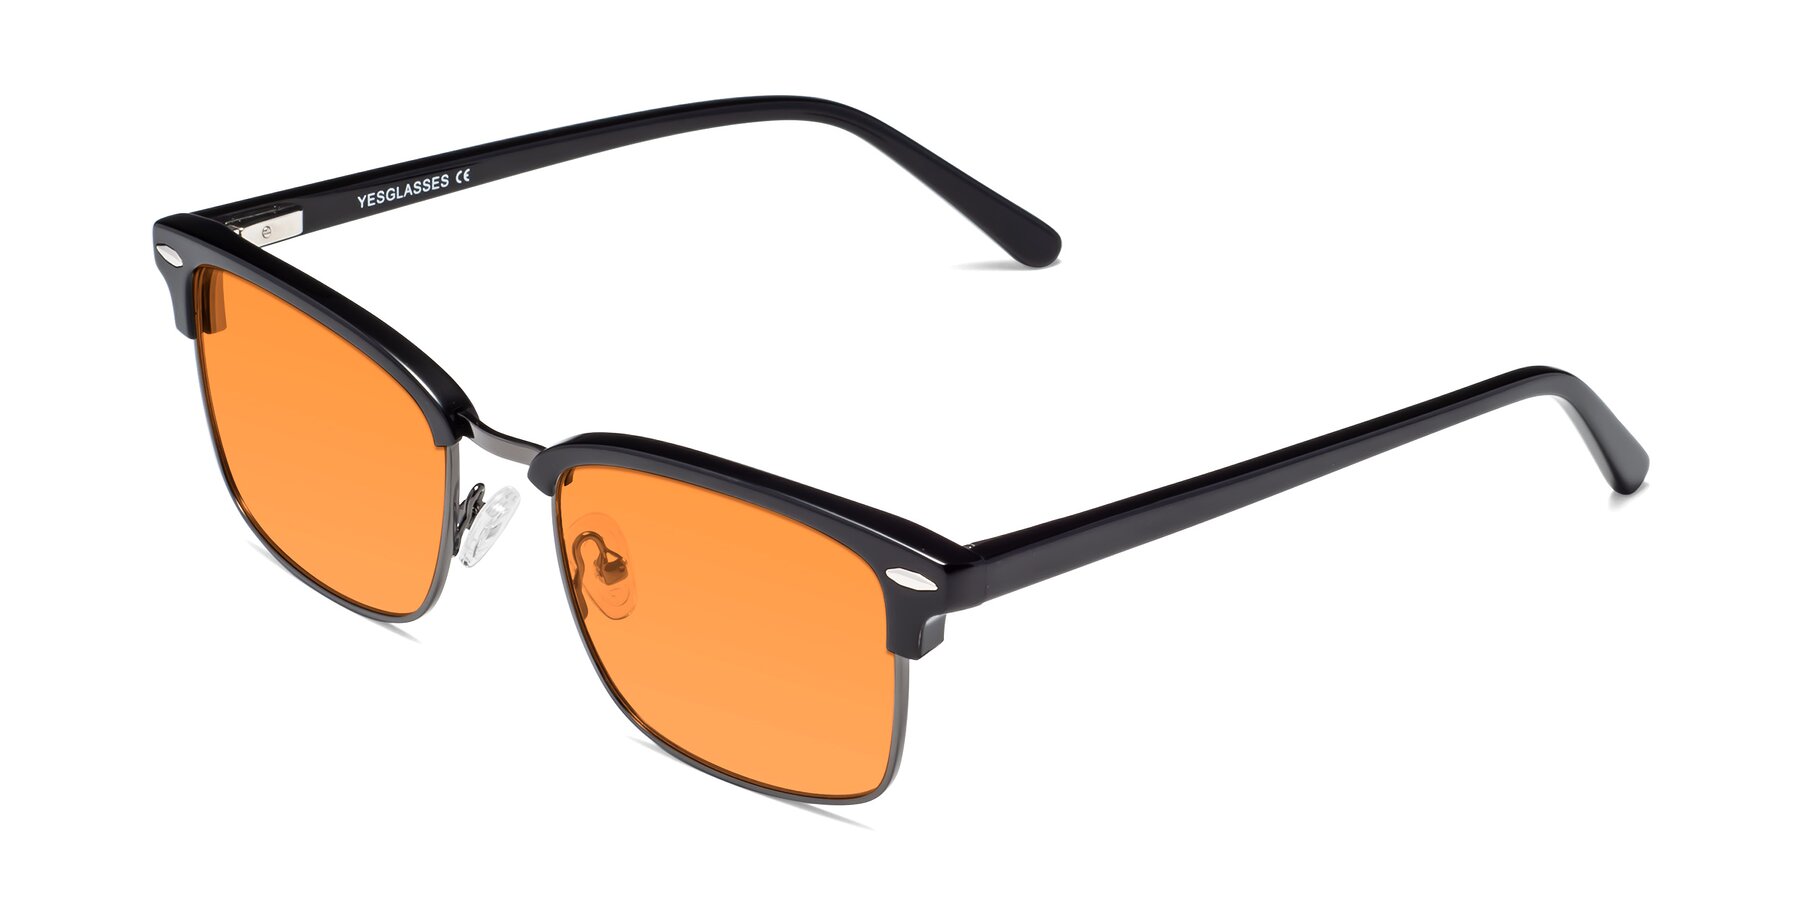 Angle of 17464 in Black-Gunmetal with Orange Tinted Lenses